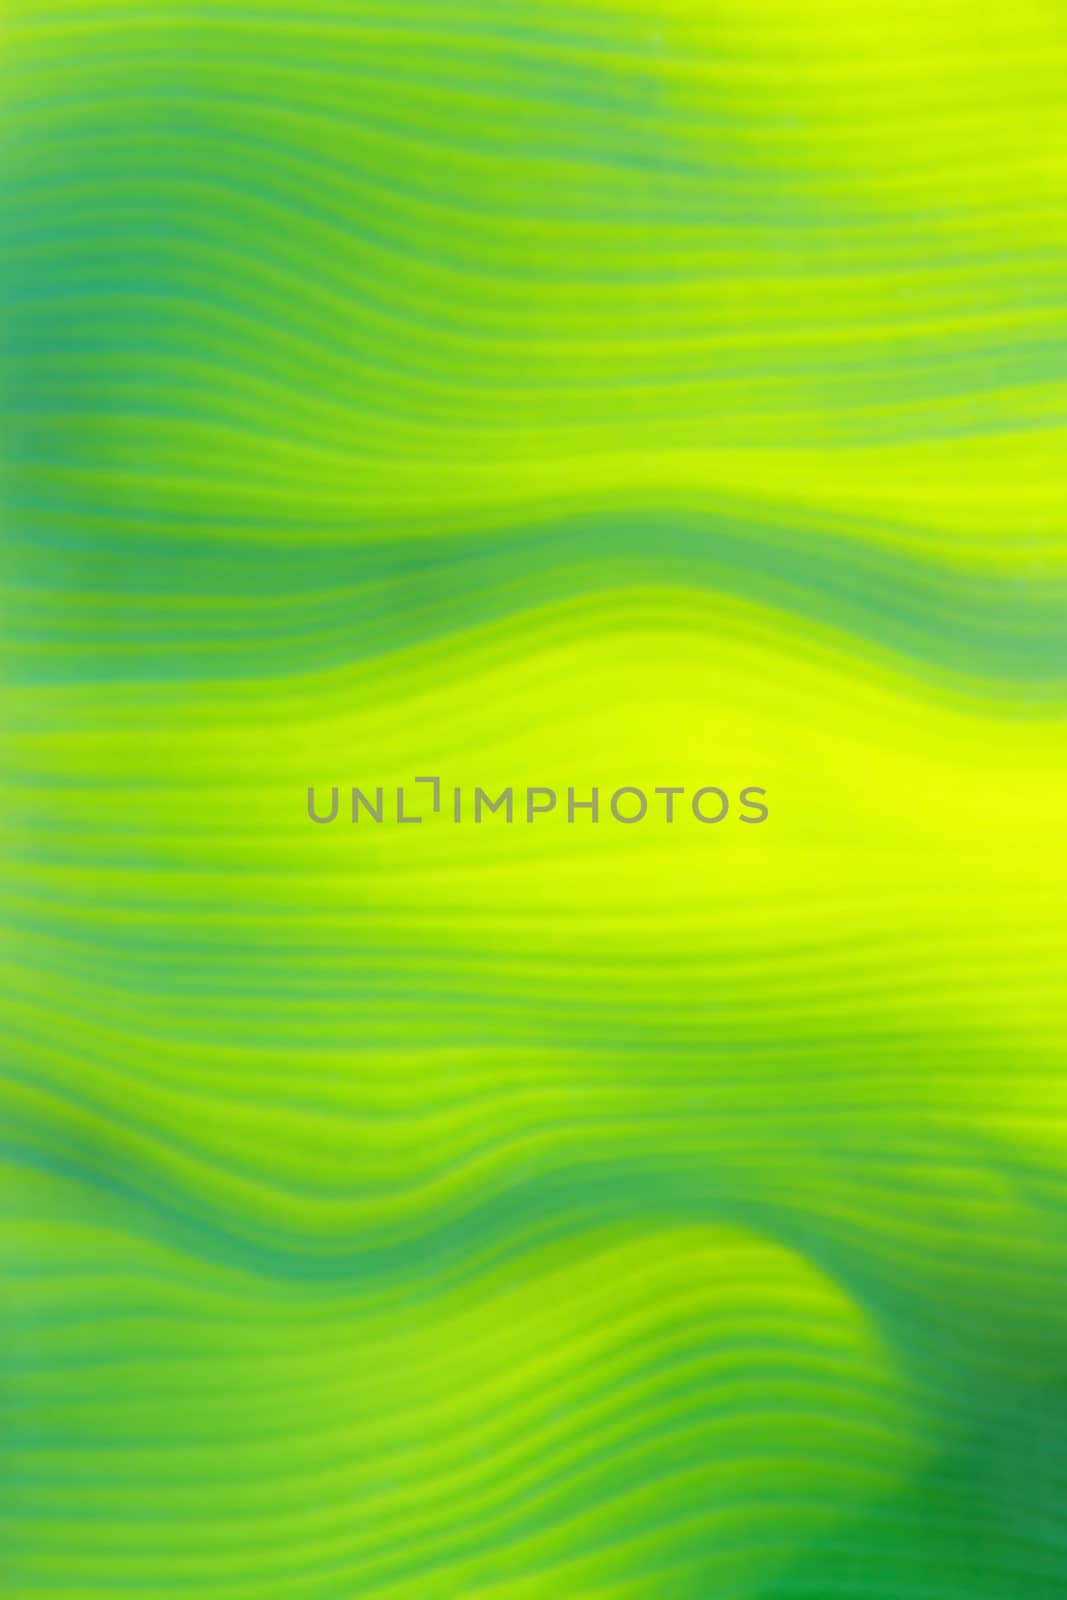 background abstract green leaves